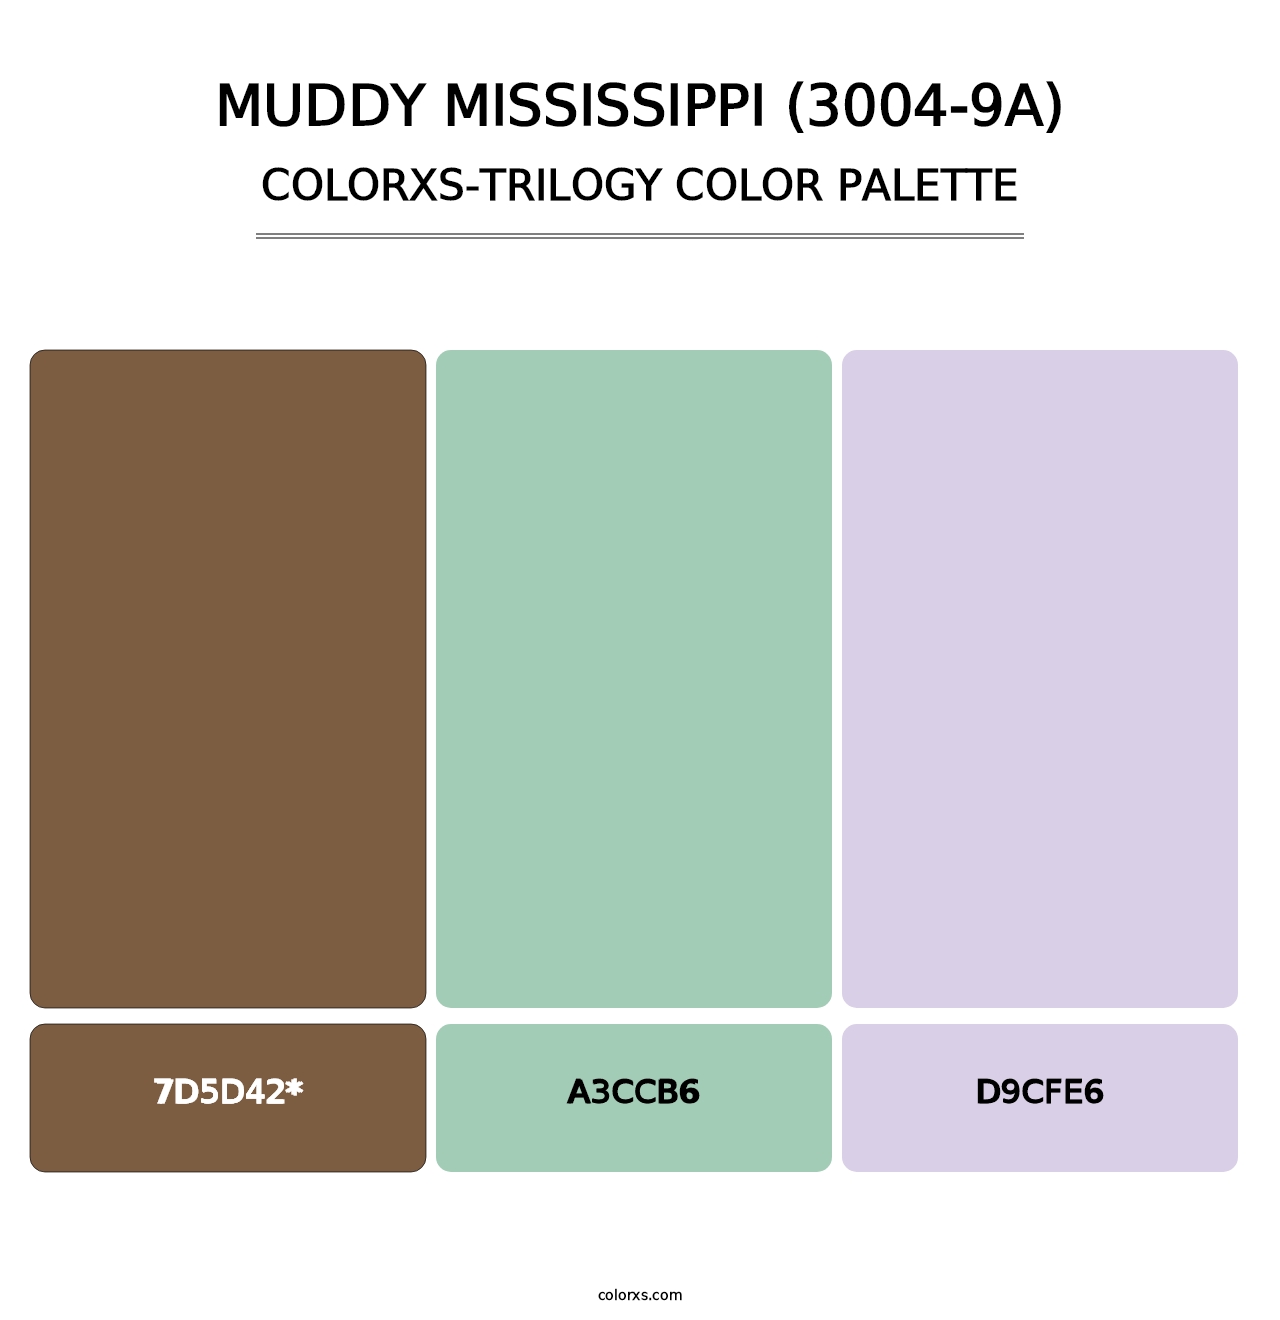 Muddy Mississippi (3004-9A) - Colorxs Trilogy Palette